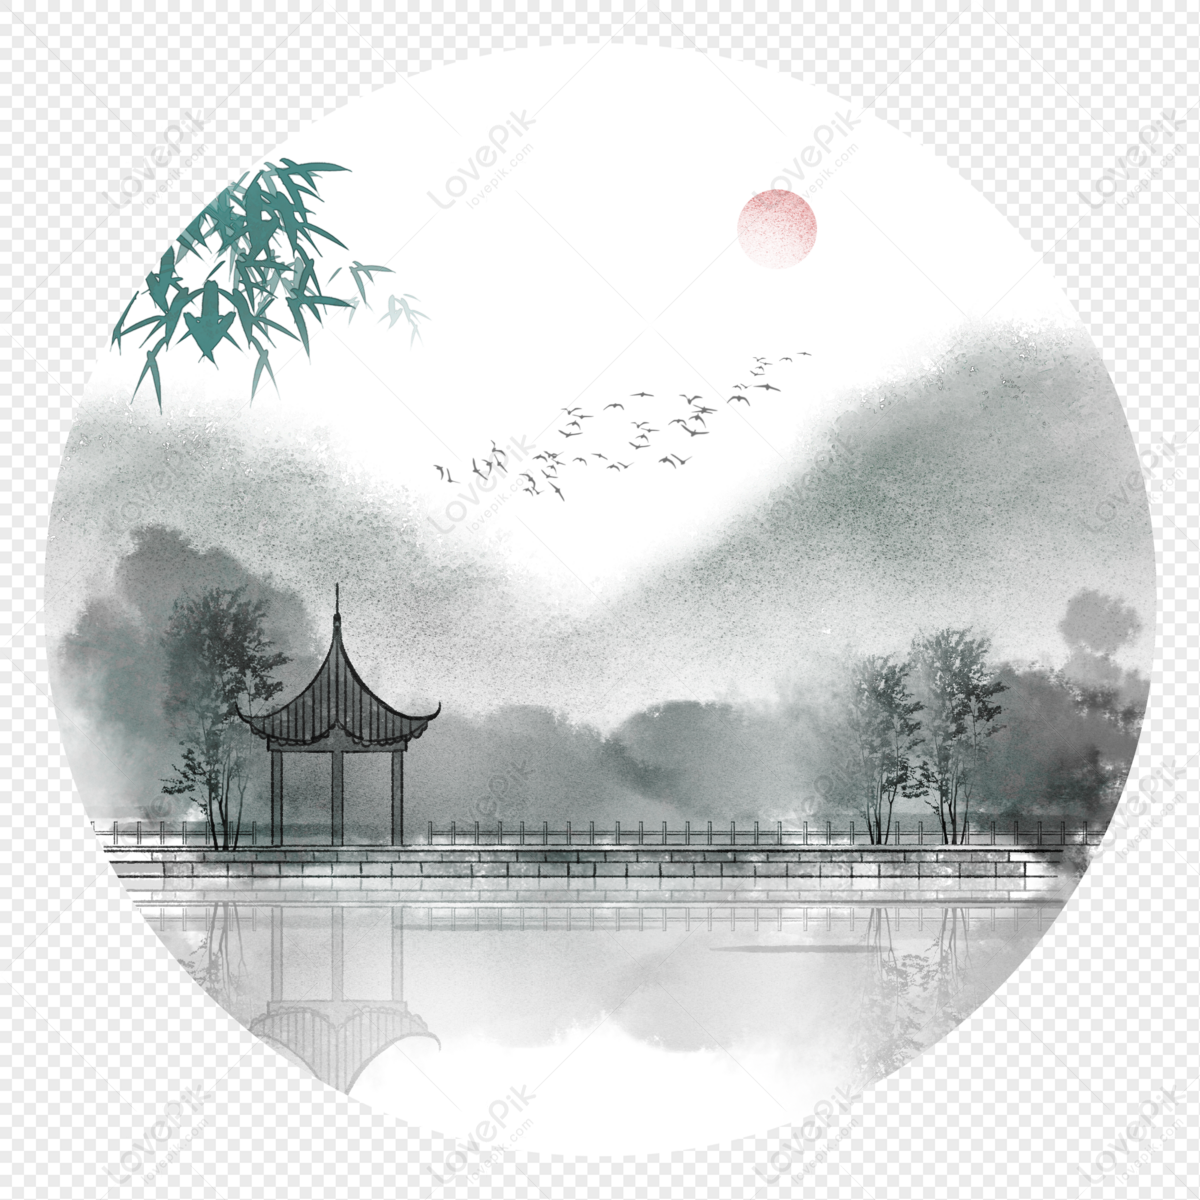 ChineseMonochromes ink landscape in Materials - UE Marketplace